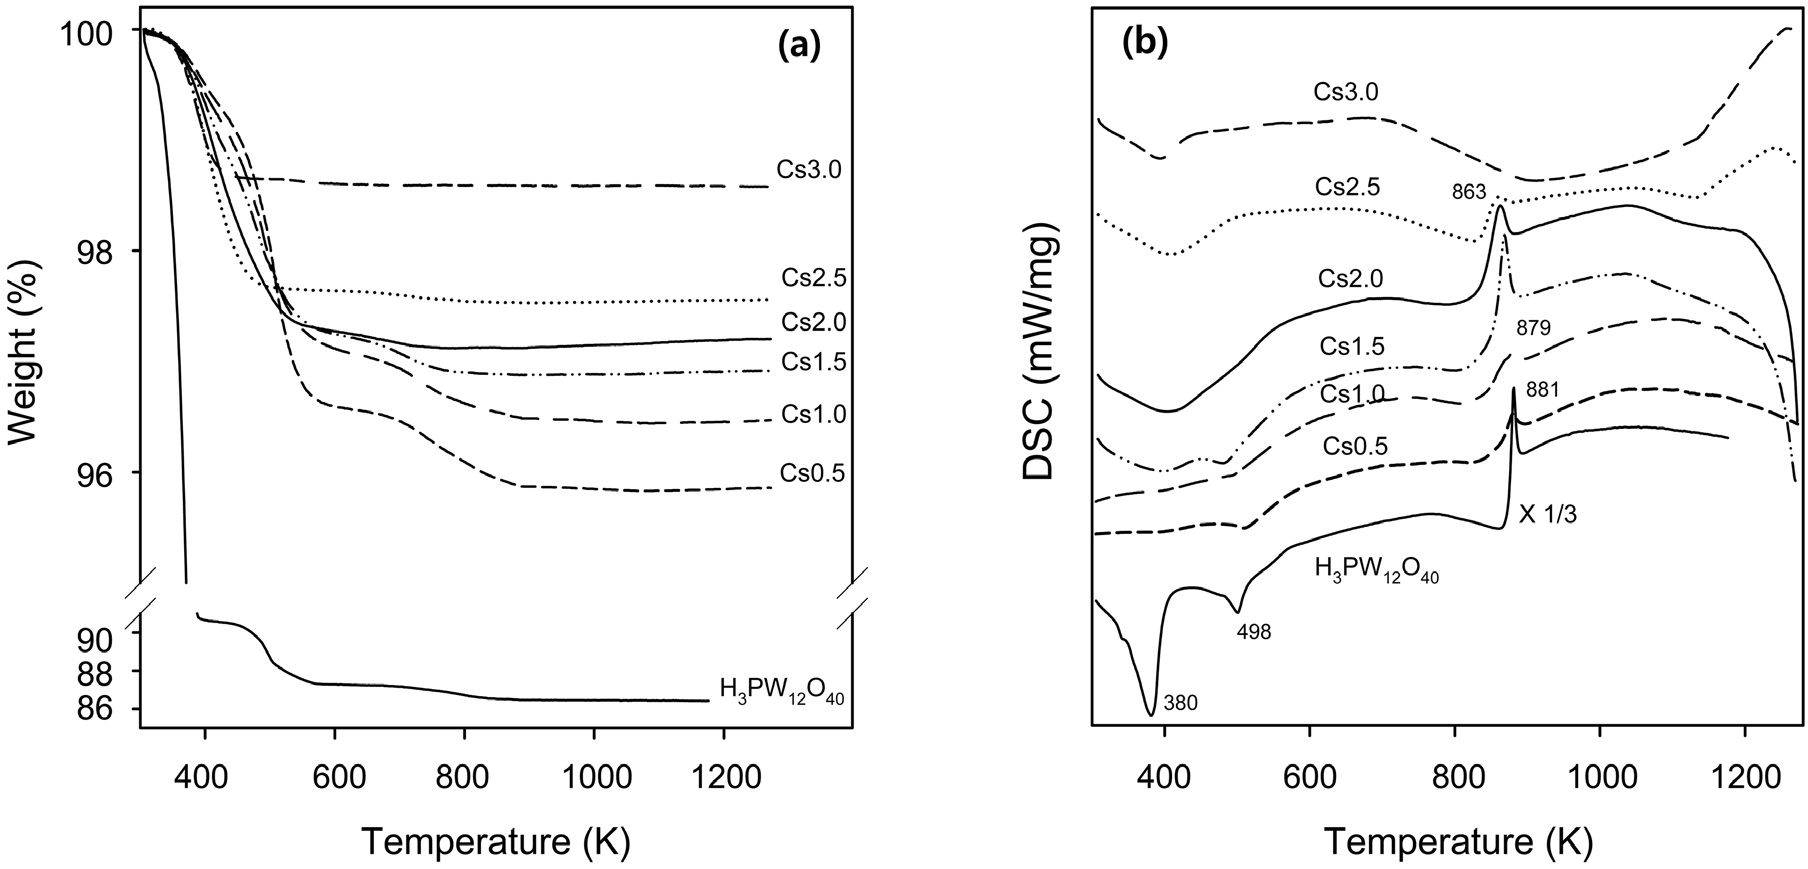 Variations of the weight during TG analysis (a) and the heat flux during DSC analysis (b) with temperature for CsxH3-xPW12O40 catalysts.